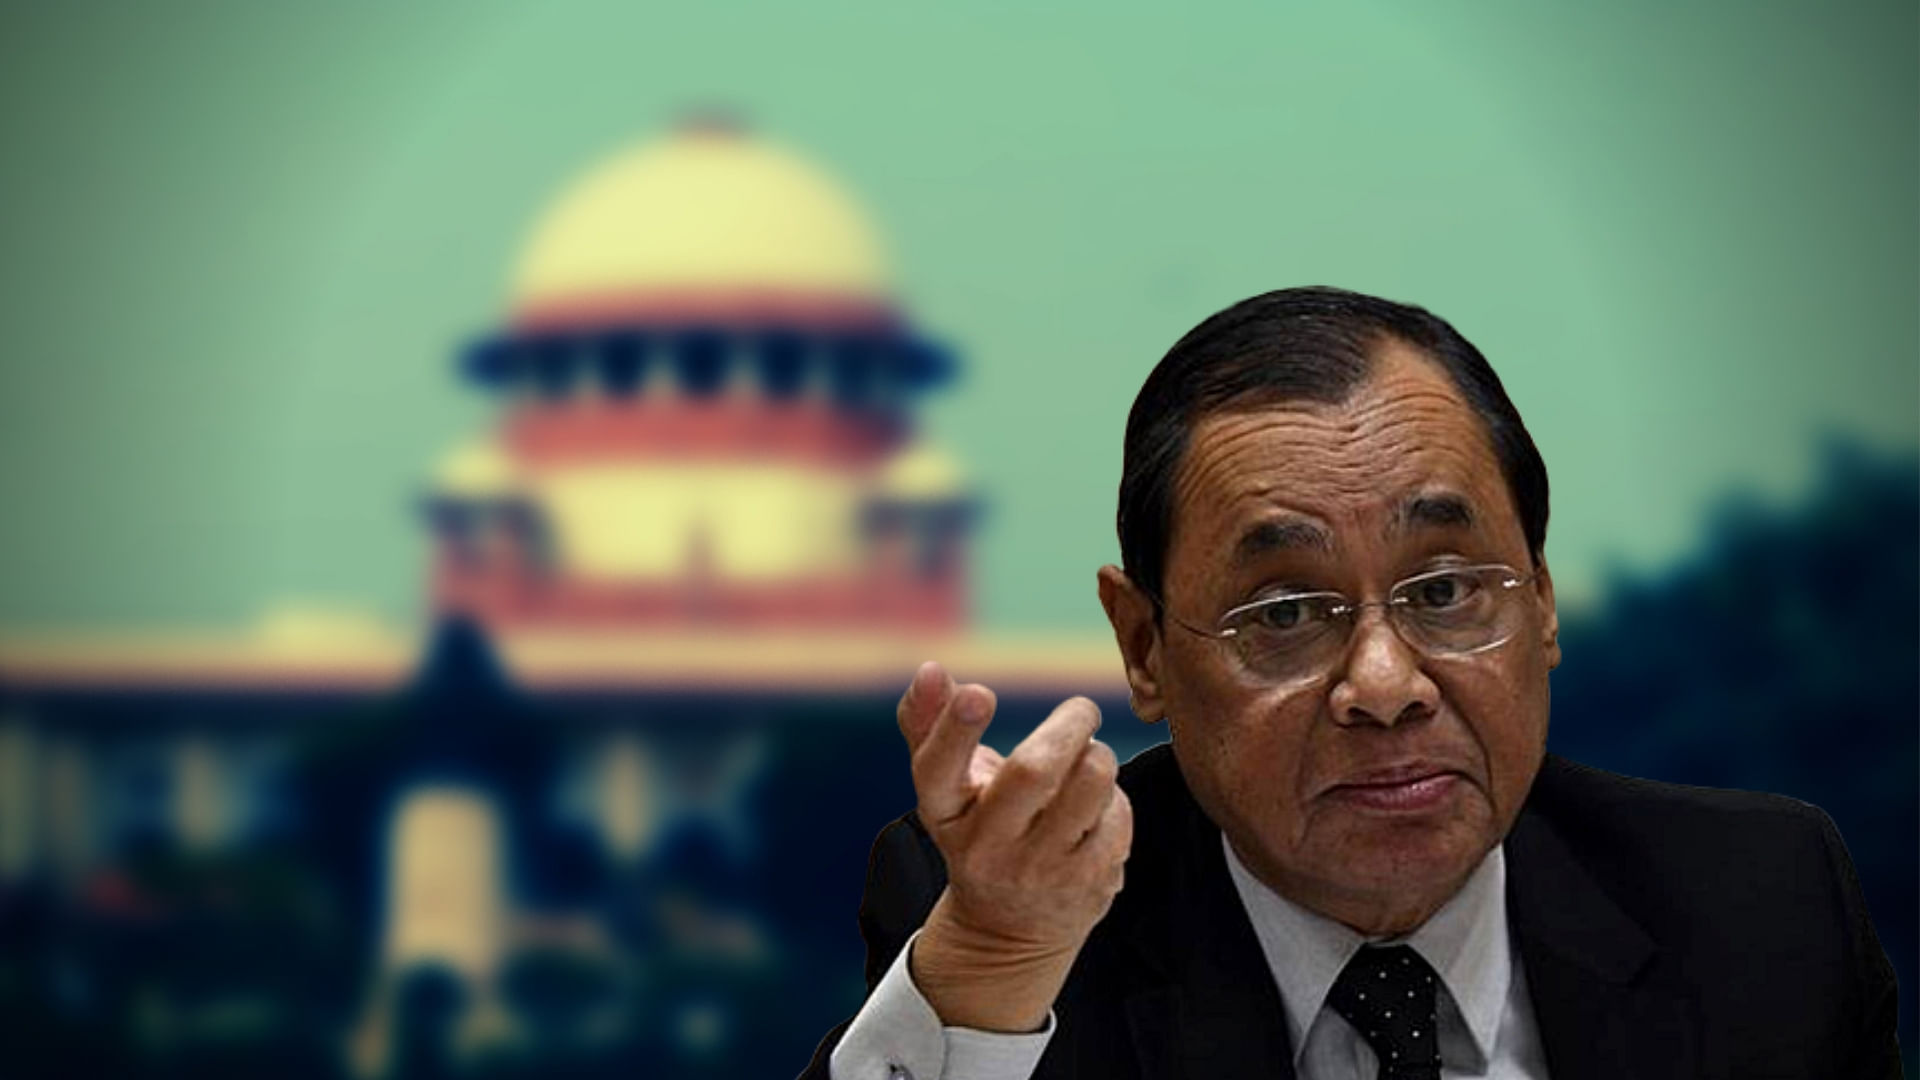 A woman has alleged that CJI Gogoi had made sexual advances on her while they were at his residence-office on 10 and 11 October, last year.